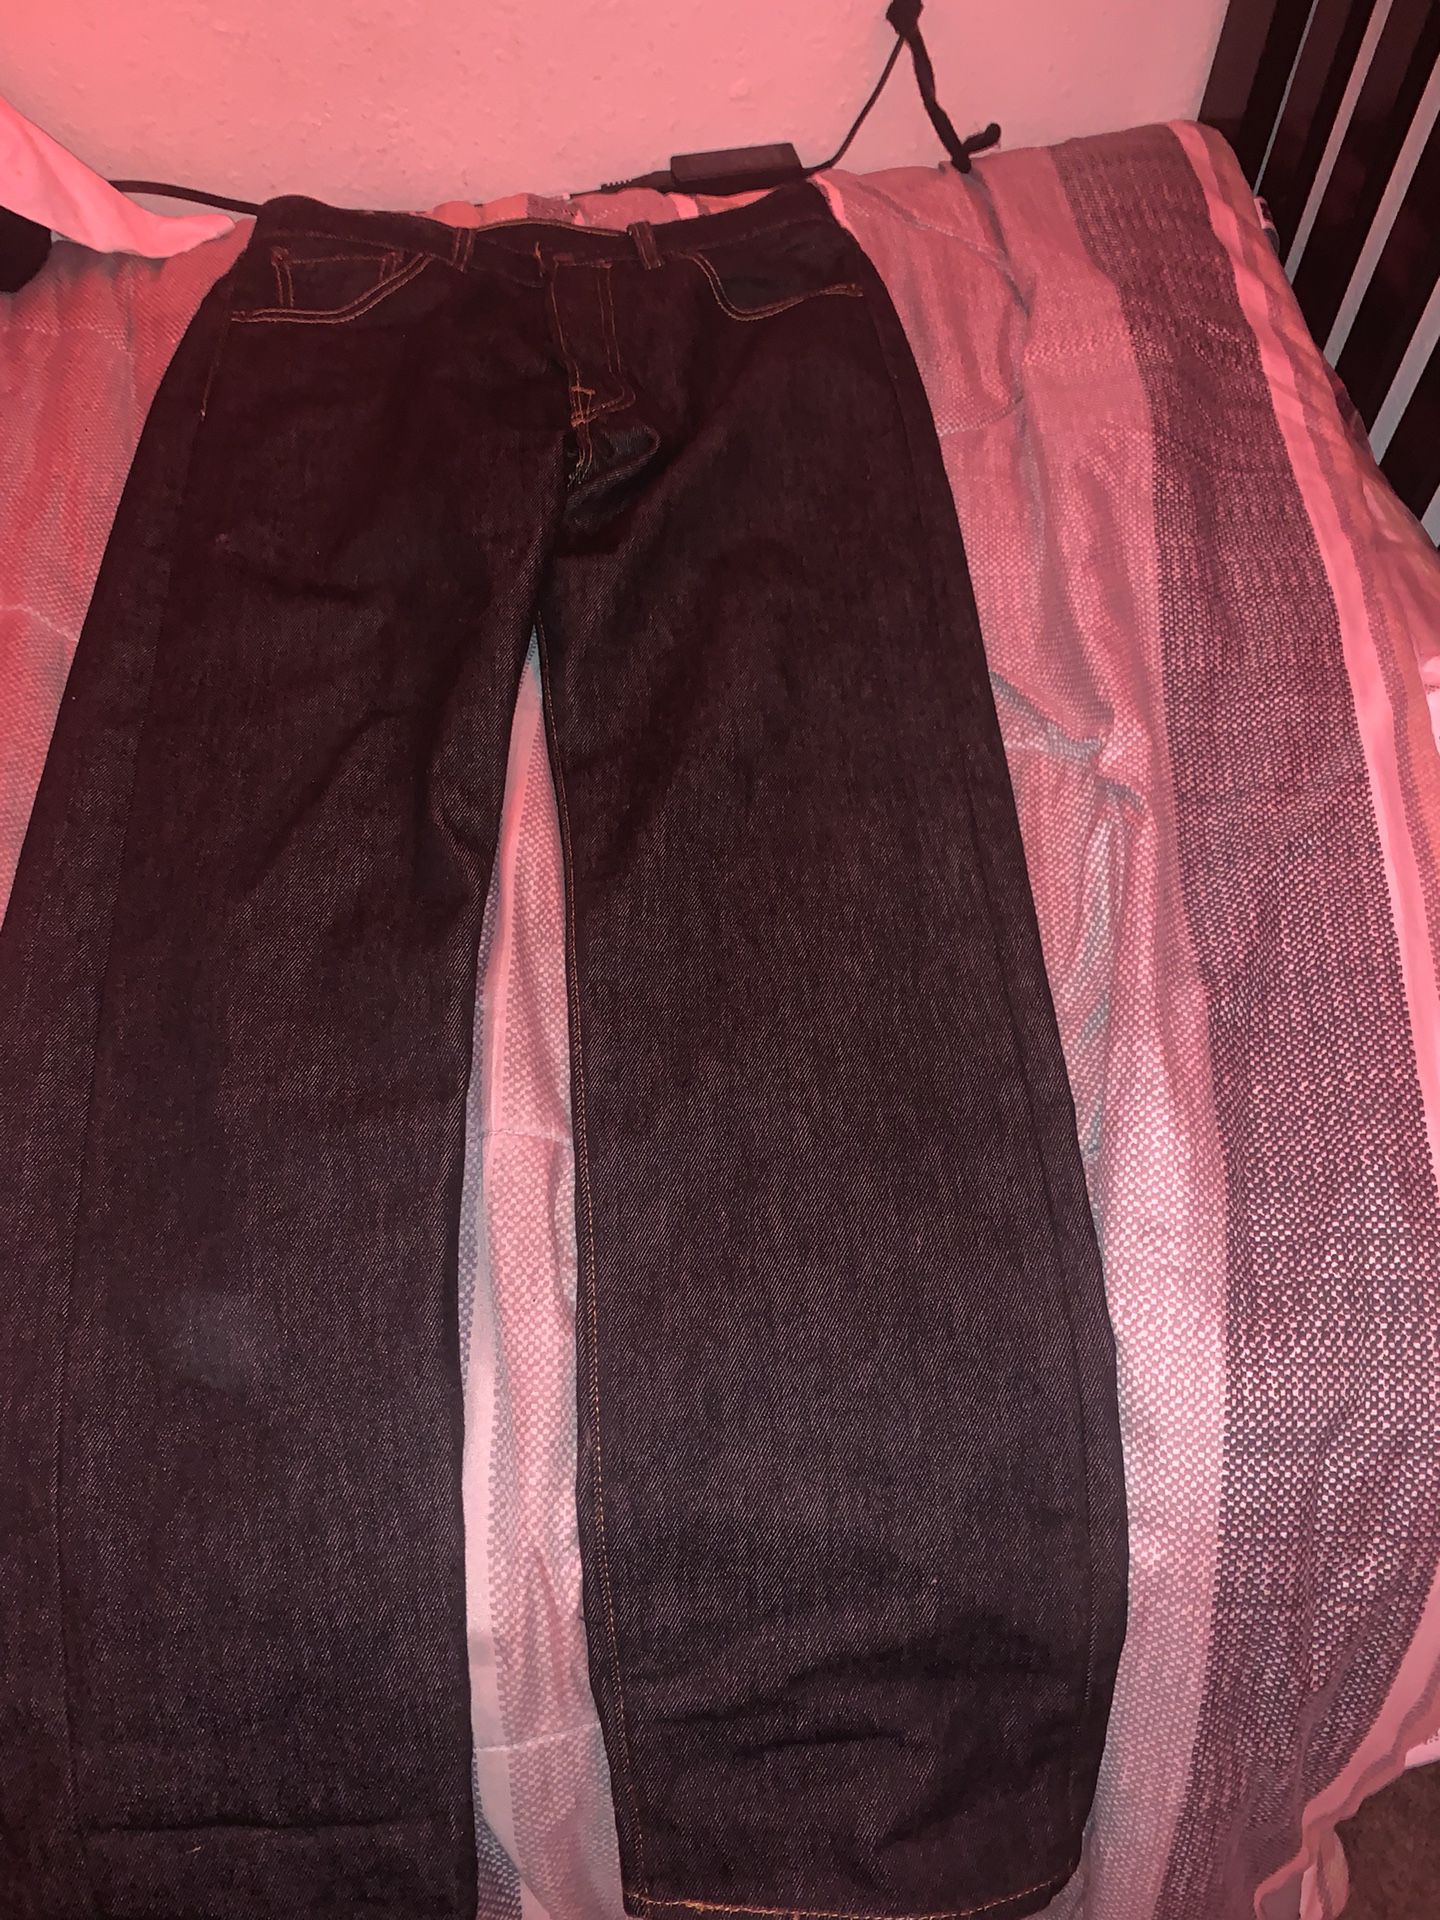 501 Levi’s 30W 30L And Comes With A Pro Club Shirt Size Small